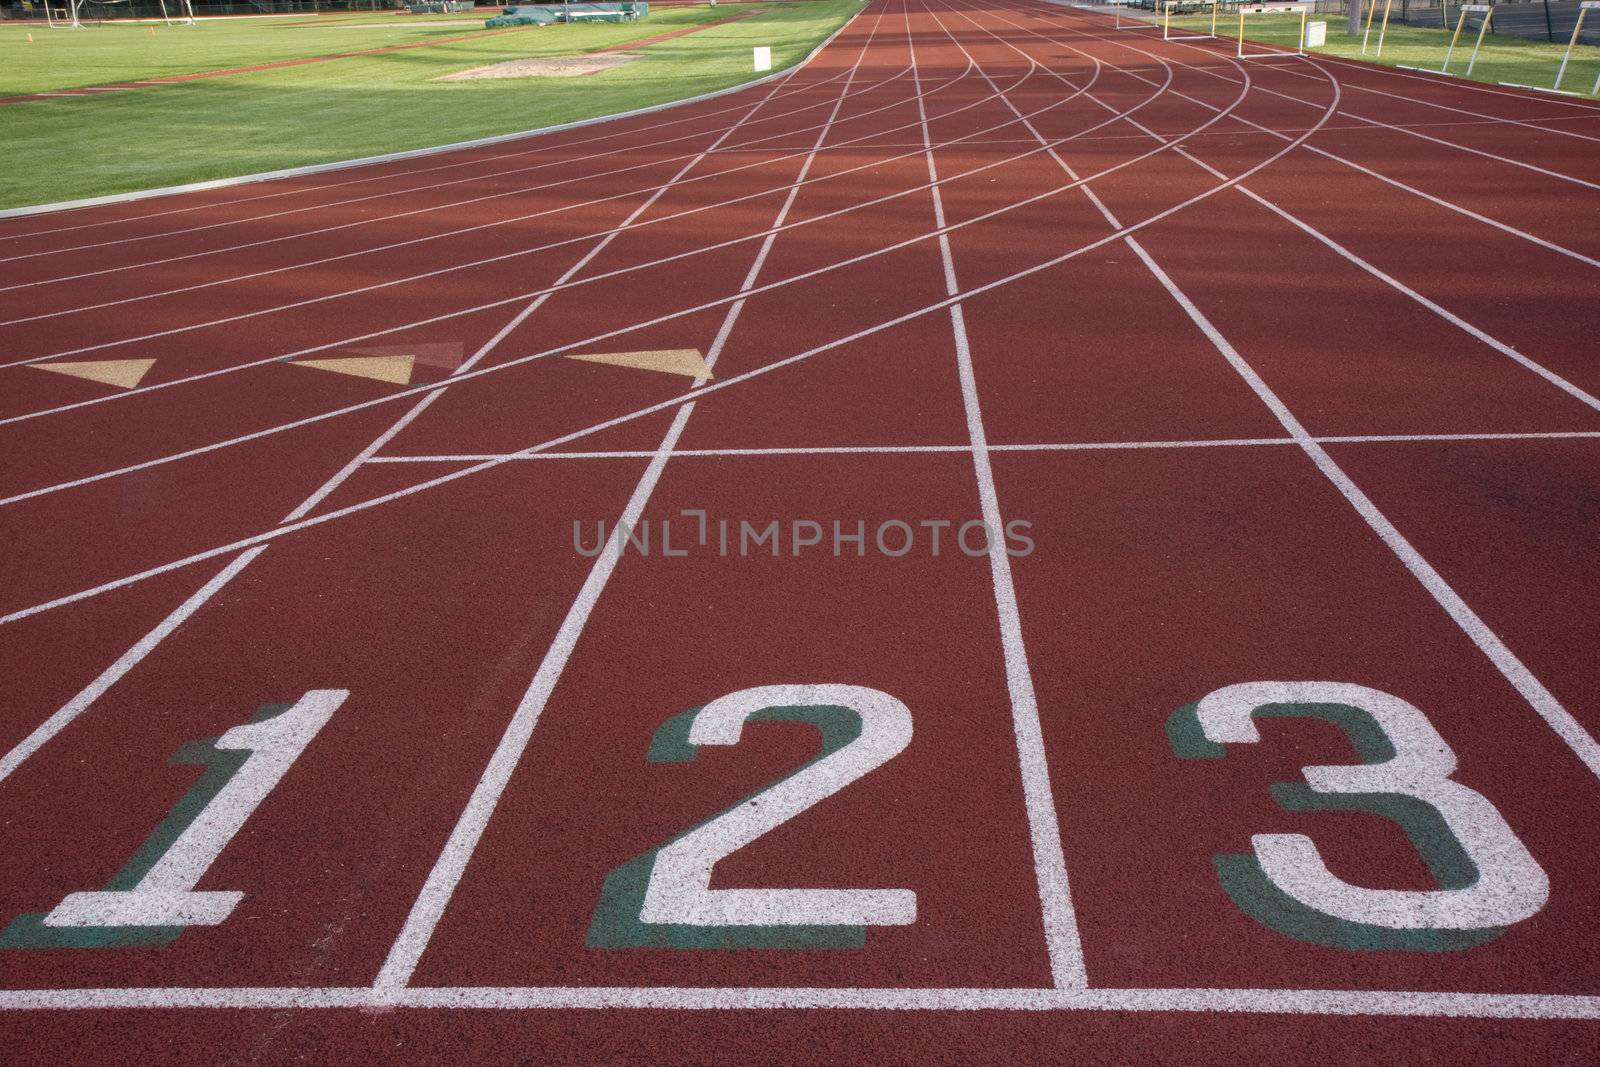 red running track with 1, 2, 3 numbers at the starting line and  green fields